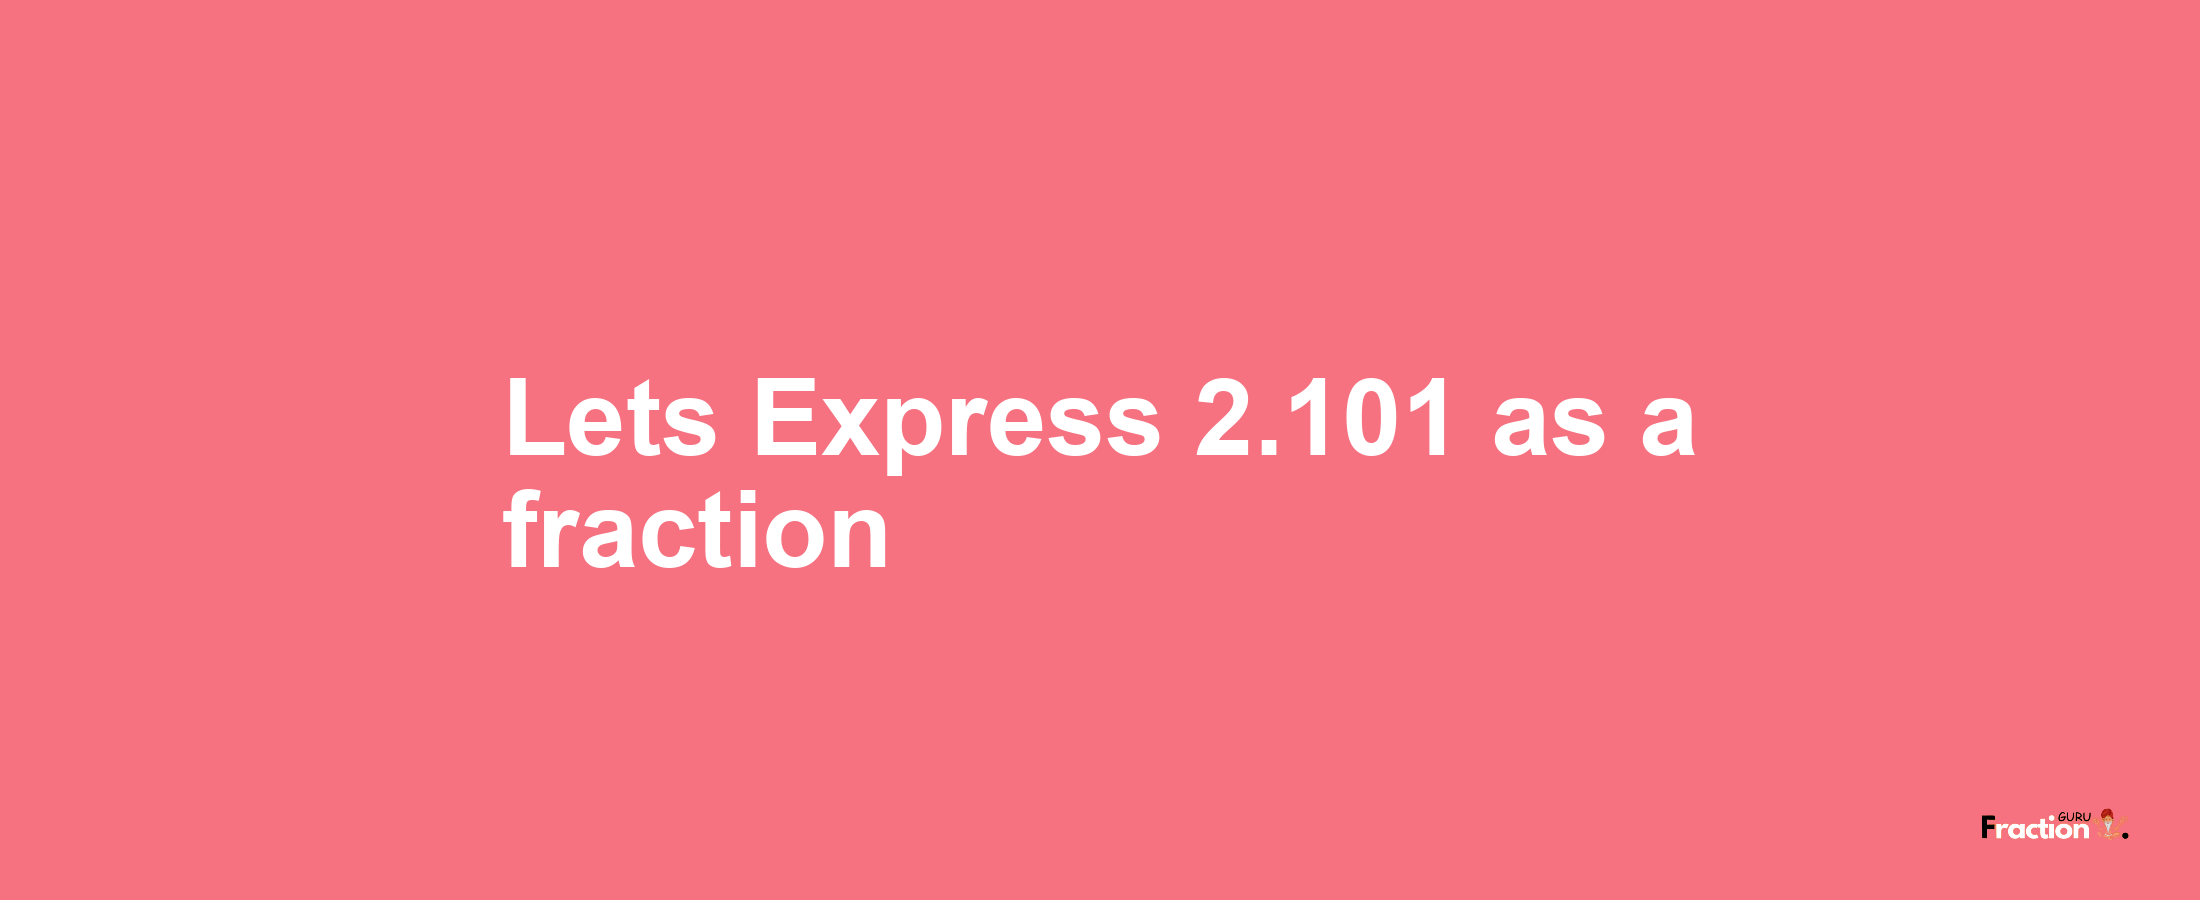 Lets Express 2.101 as afraction